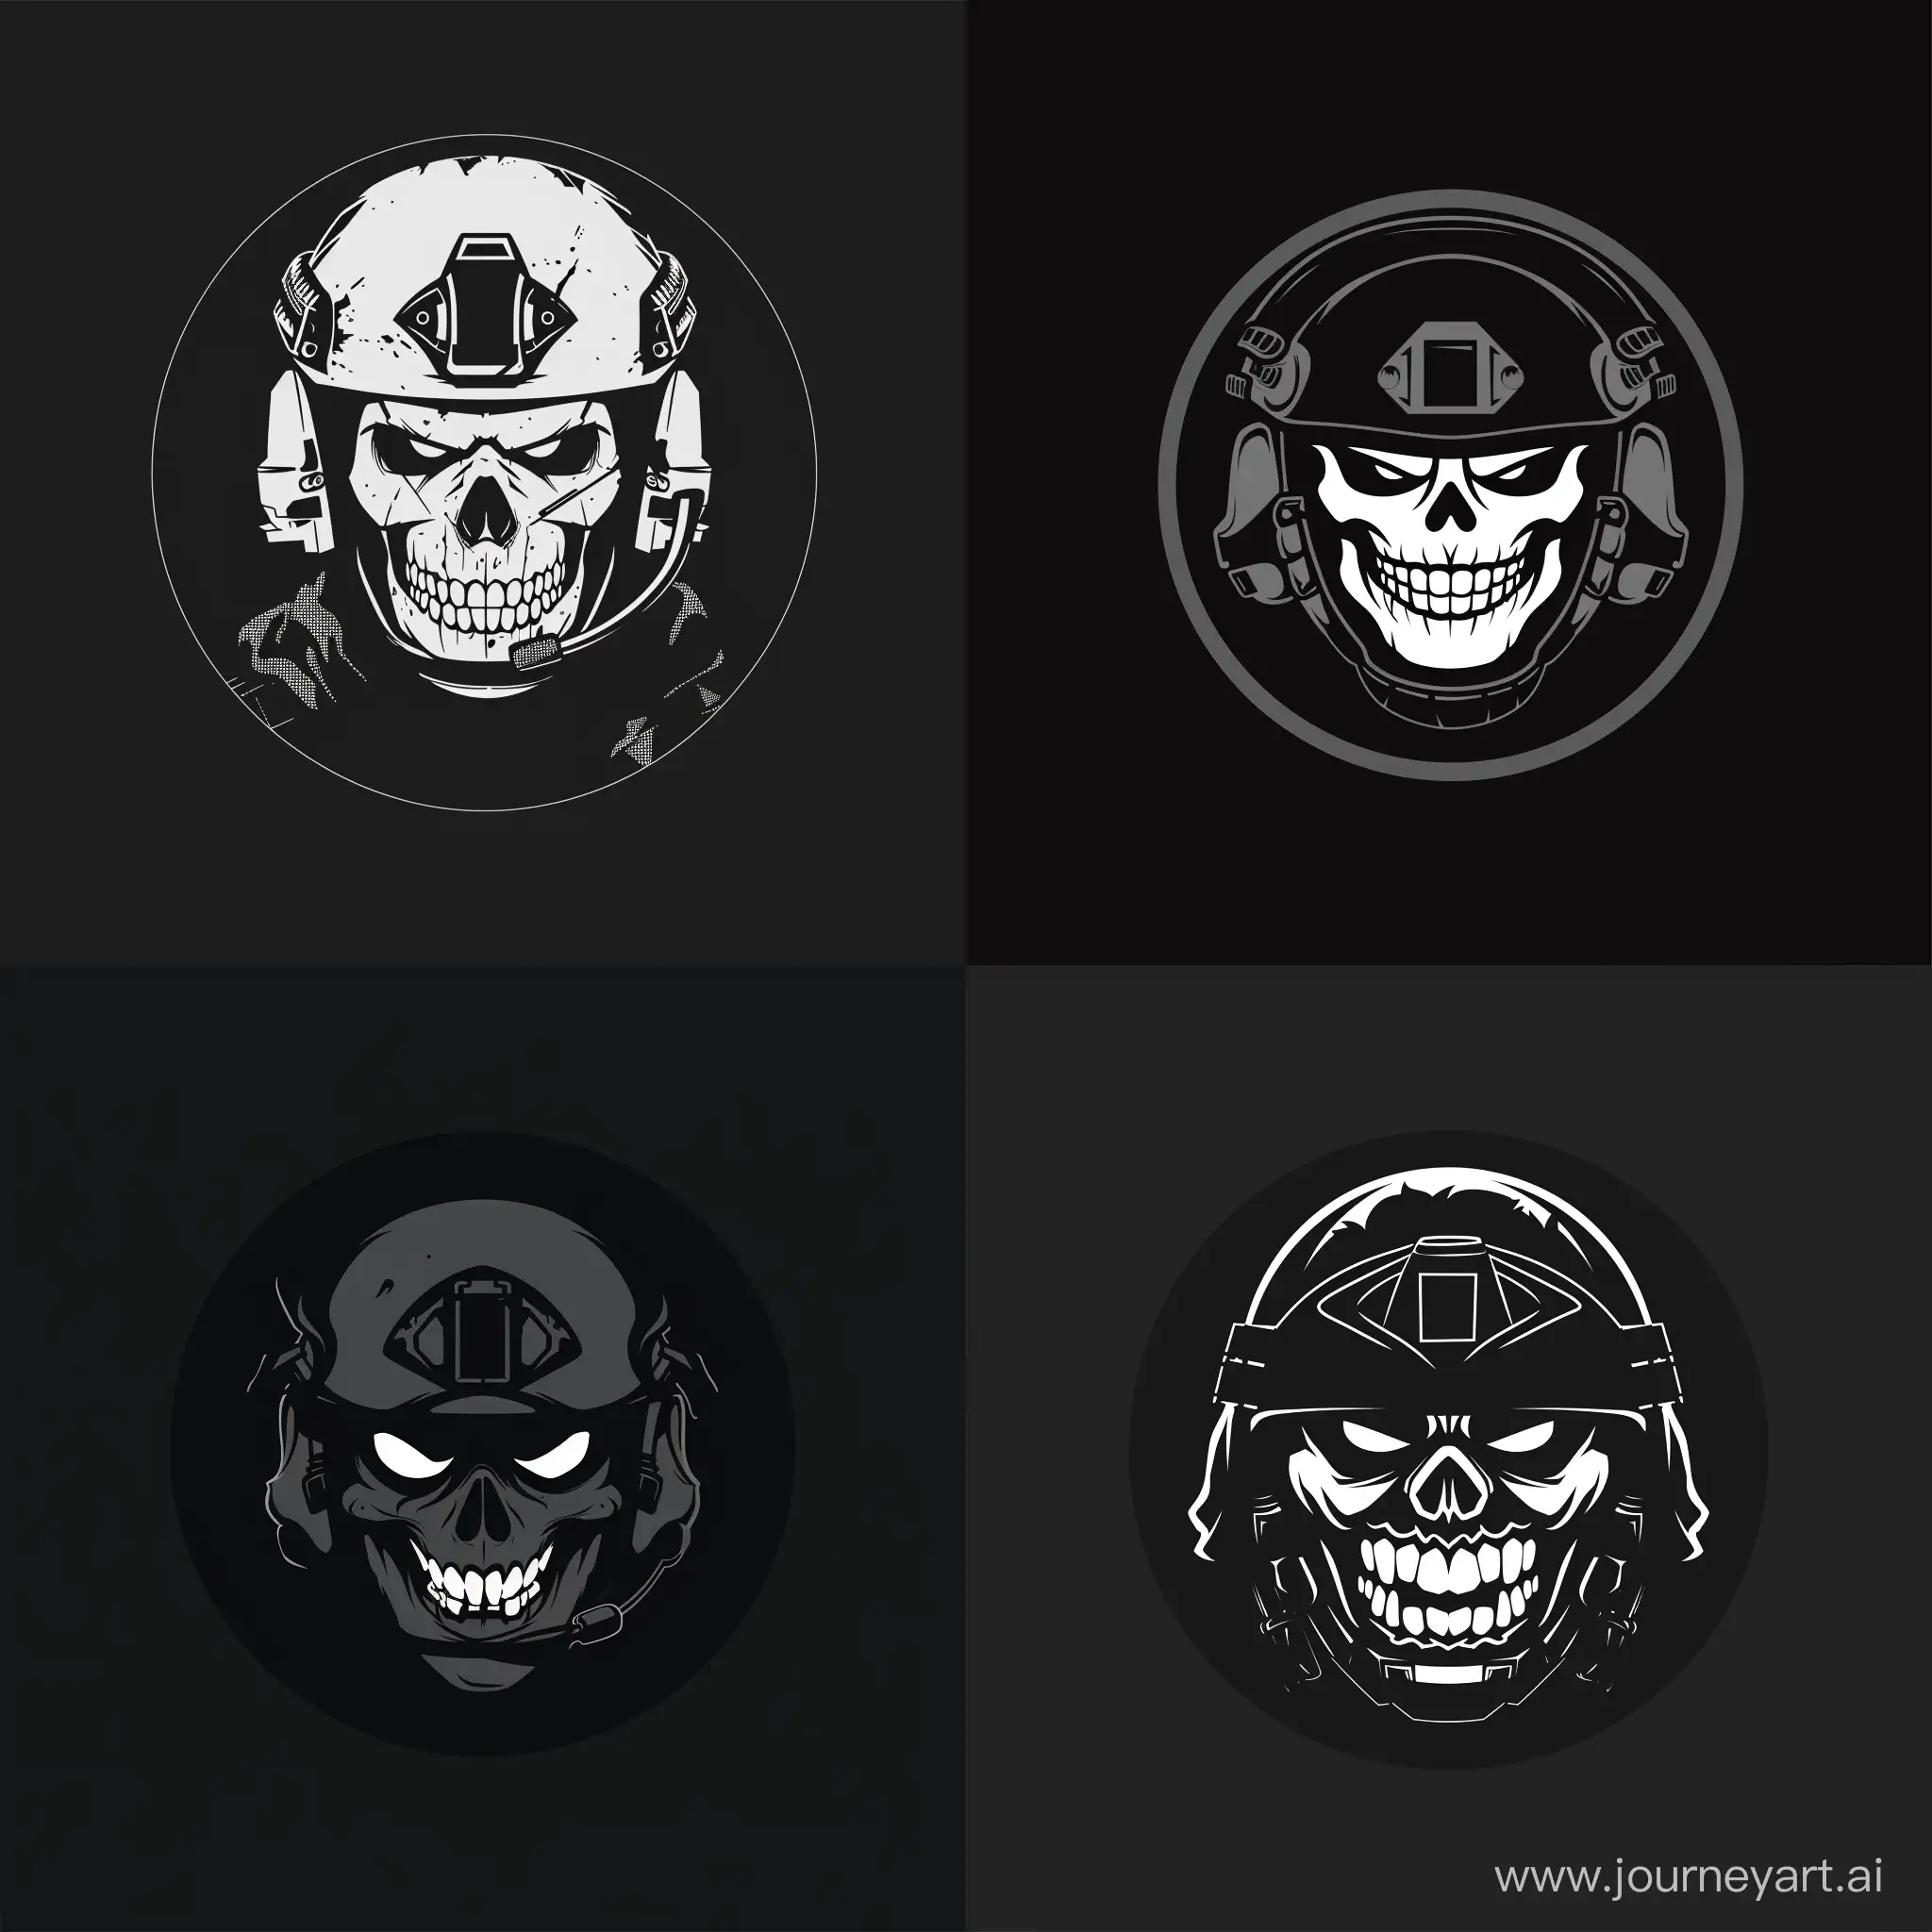 Modern-Military-Logo-Skull-Mask-and-Angry-Smiles-on-Black-Background